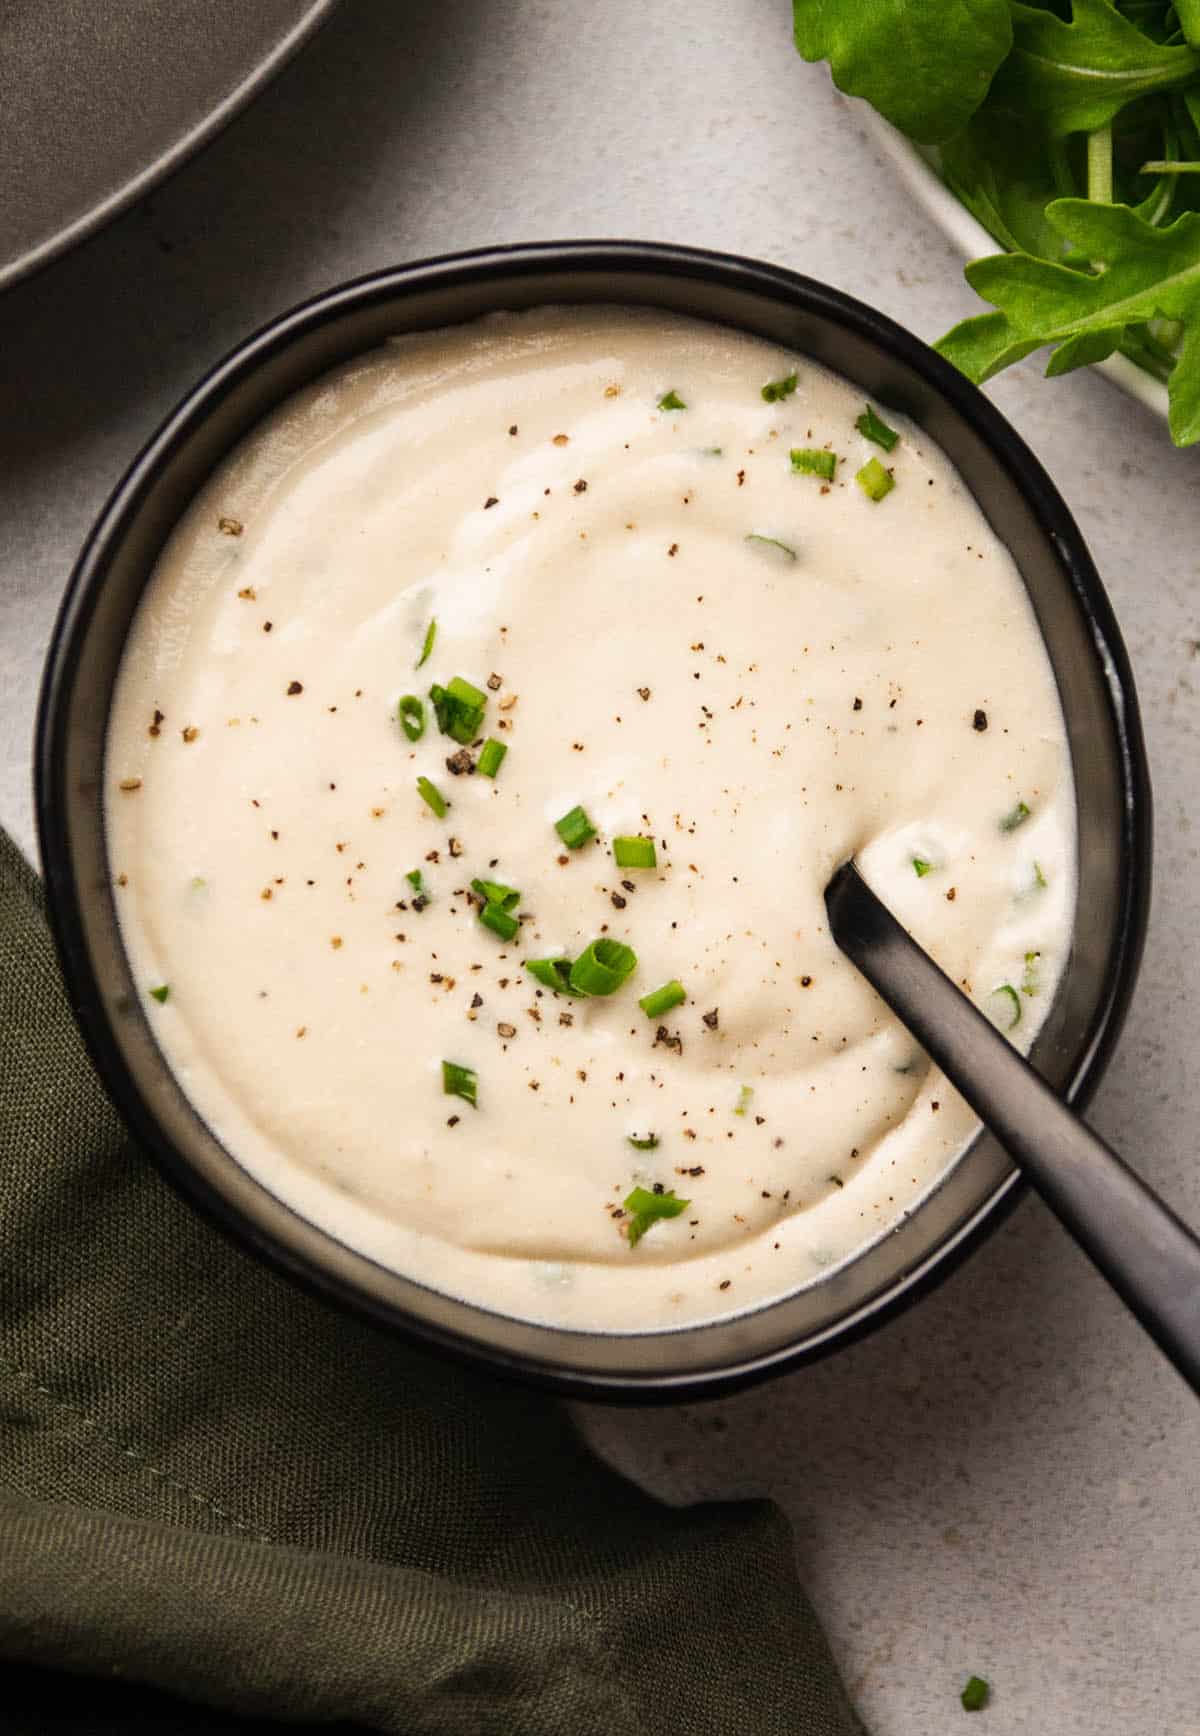 Sour cream sauce topped with fresh chives in a black bowl.